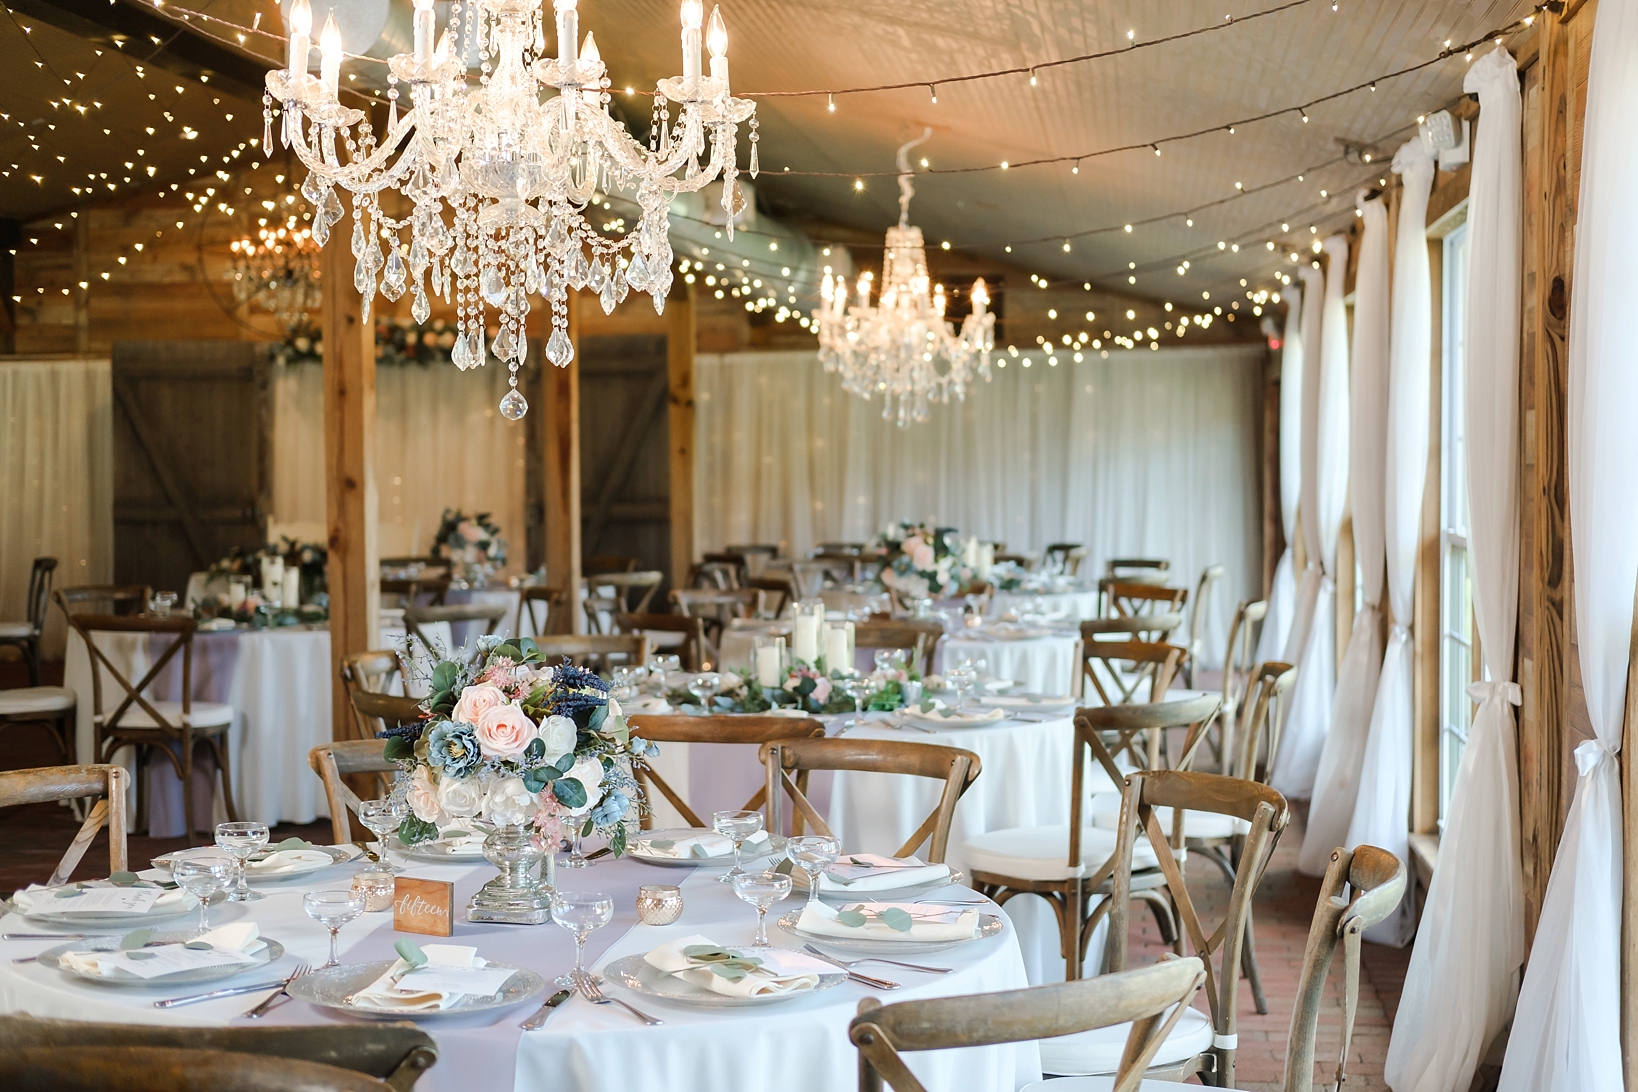 Cross Creek Ranch reception details including chandeliers and string lights